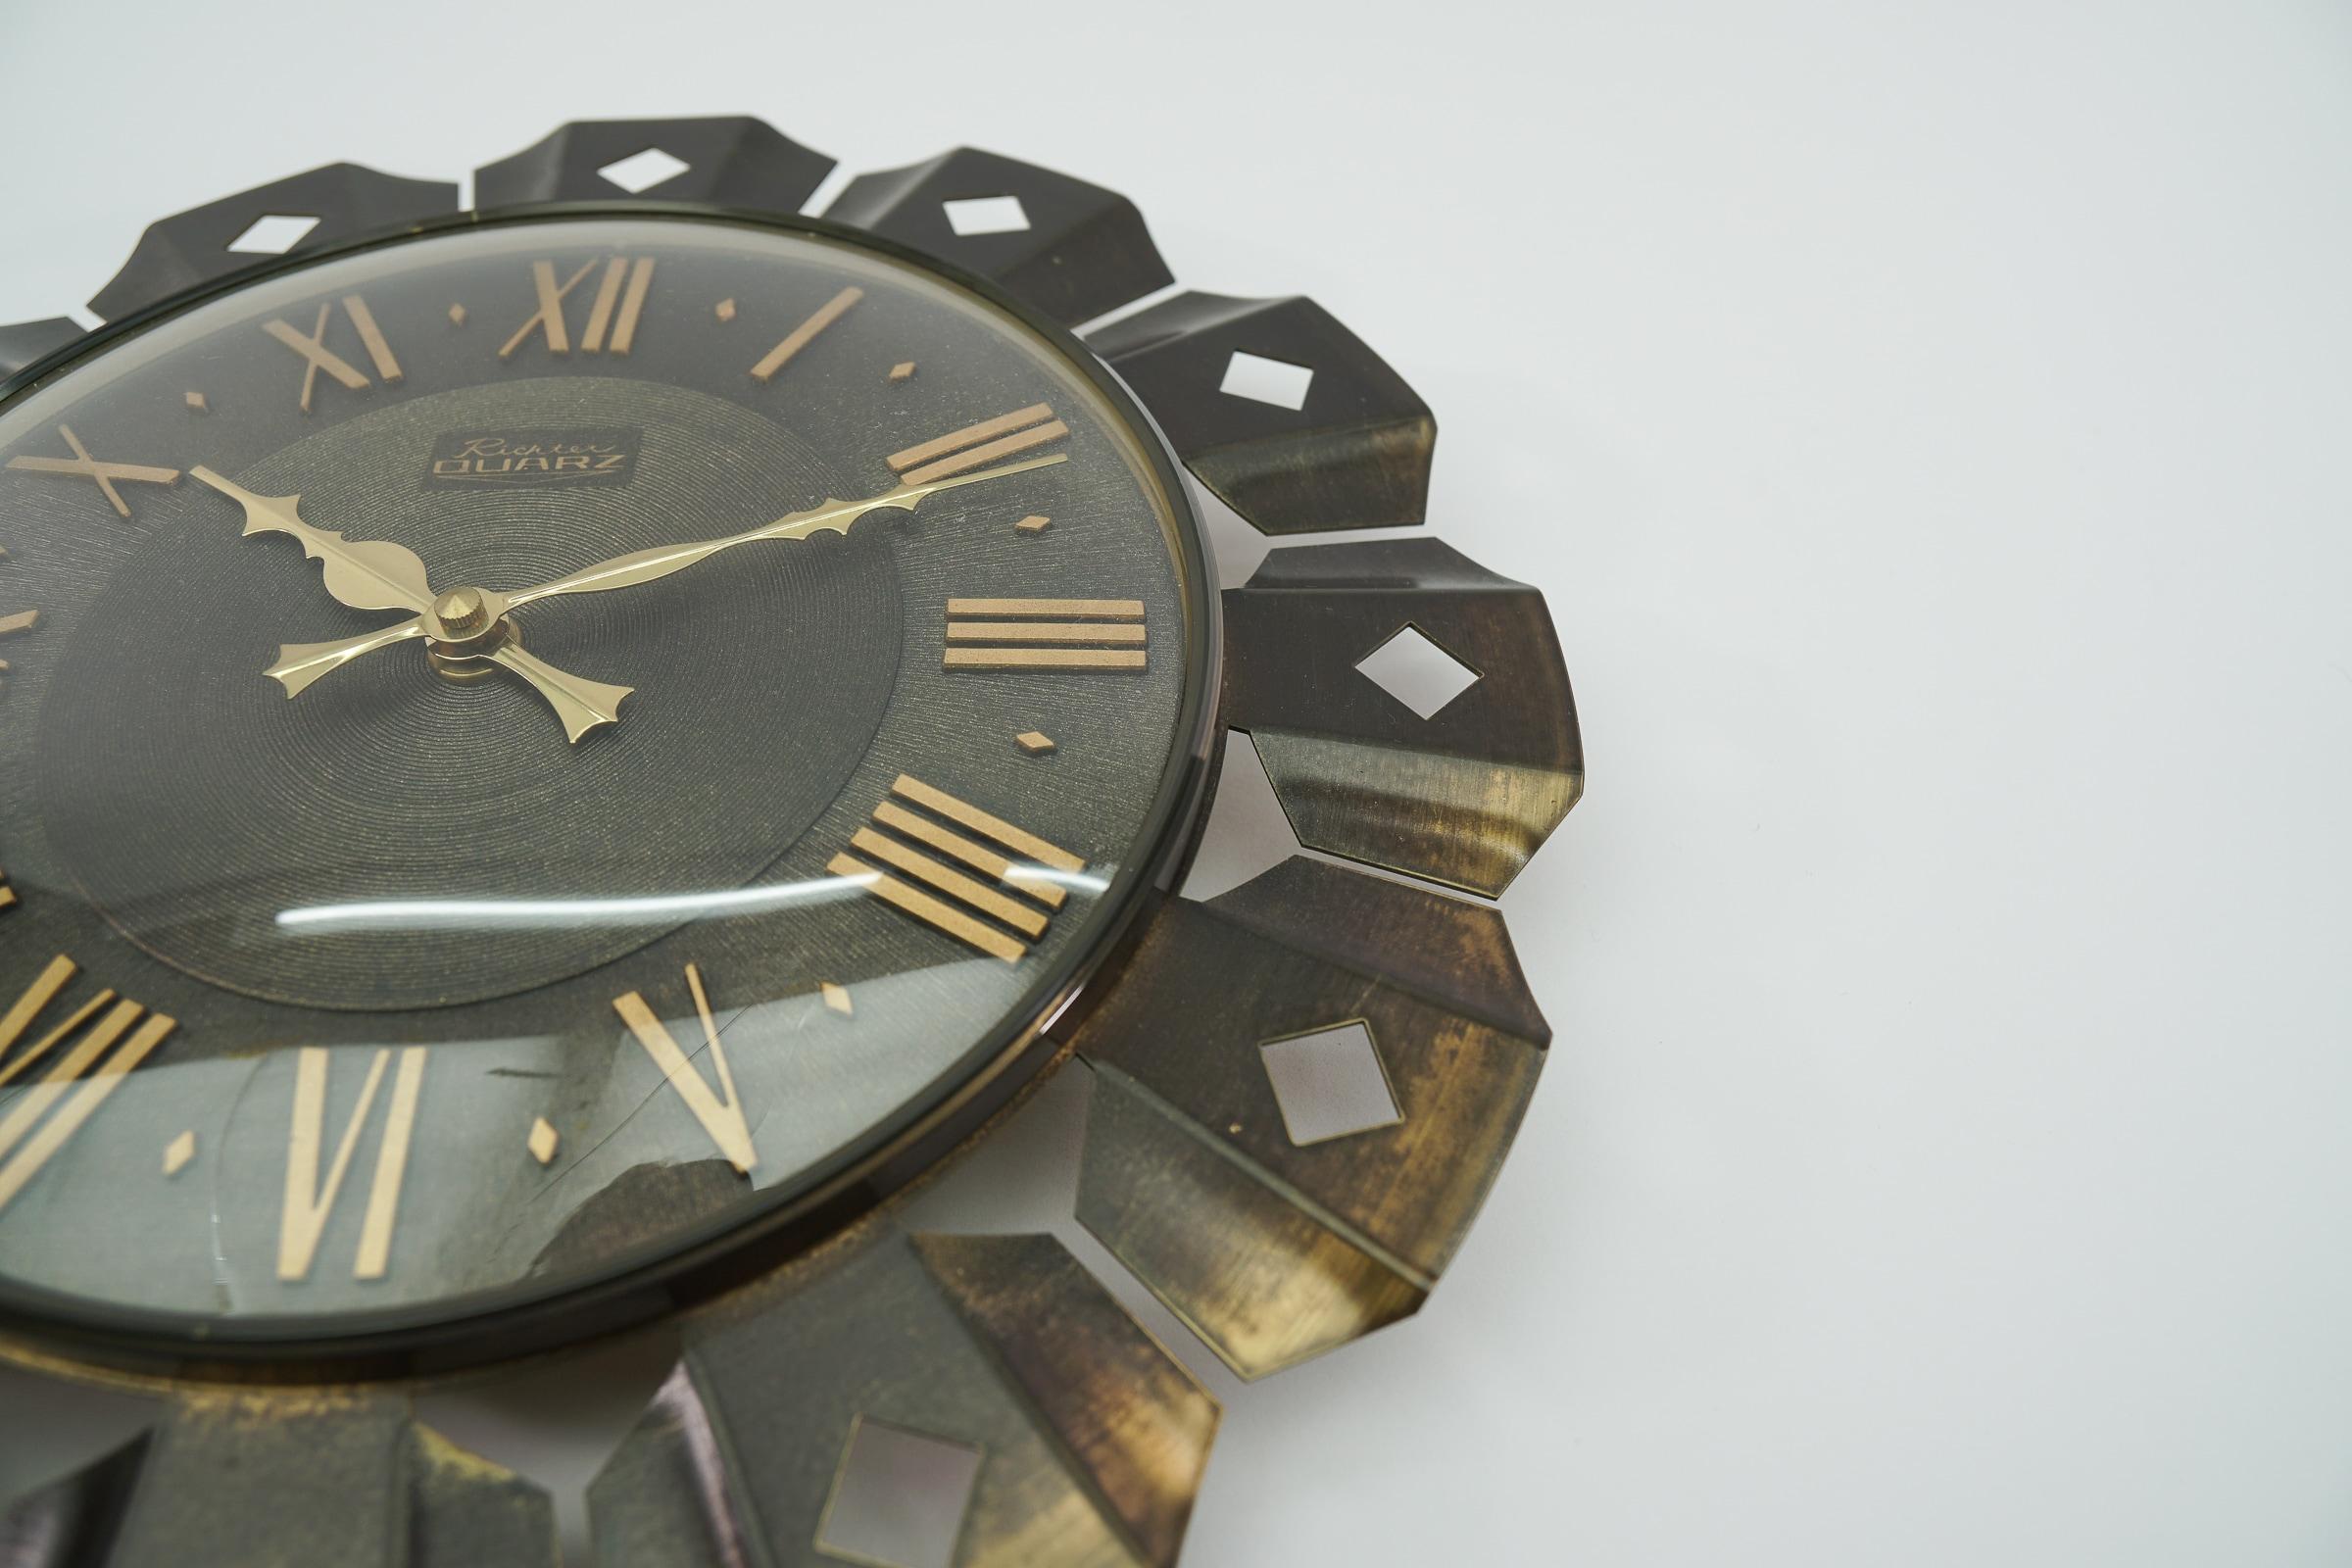 Mid-20th Century Mid-Century Modern Sunburst Wall Clock by Richter Quarz in Brass, 1960s Germany For Sale